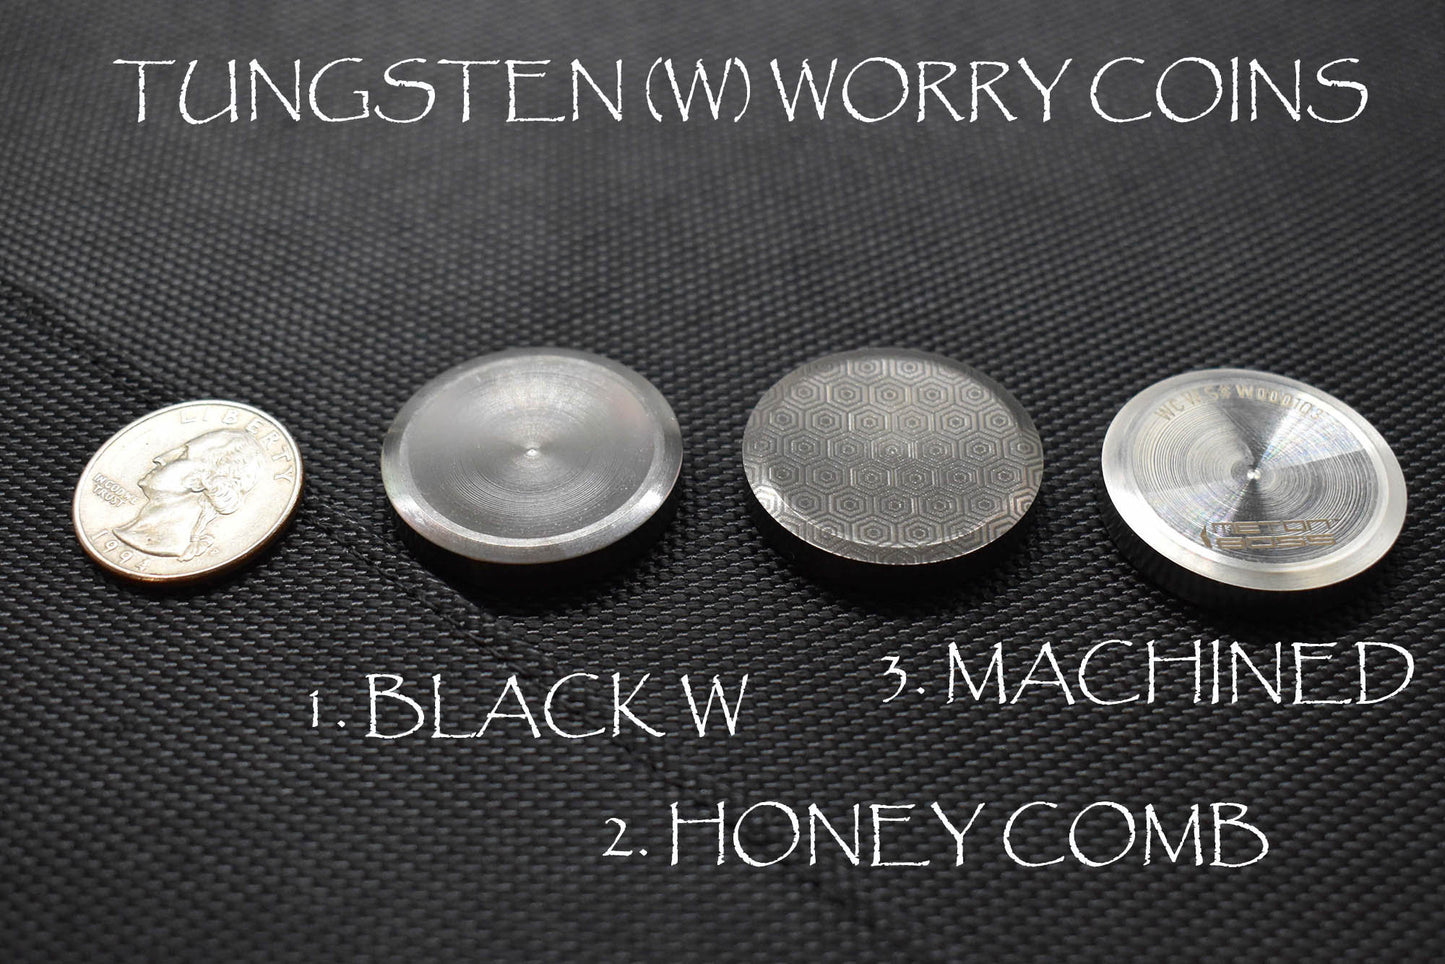 2 metal Worry Coins for the price of 1! Widest selection Tungsten Zr Ti Cu SS Br